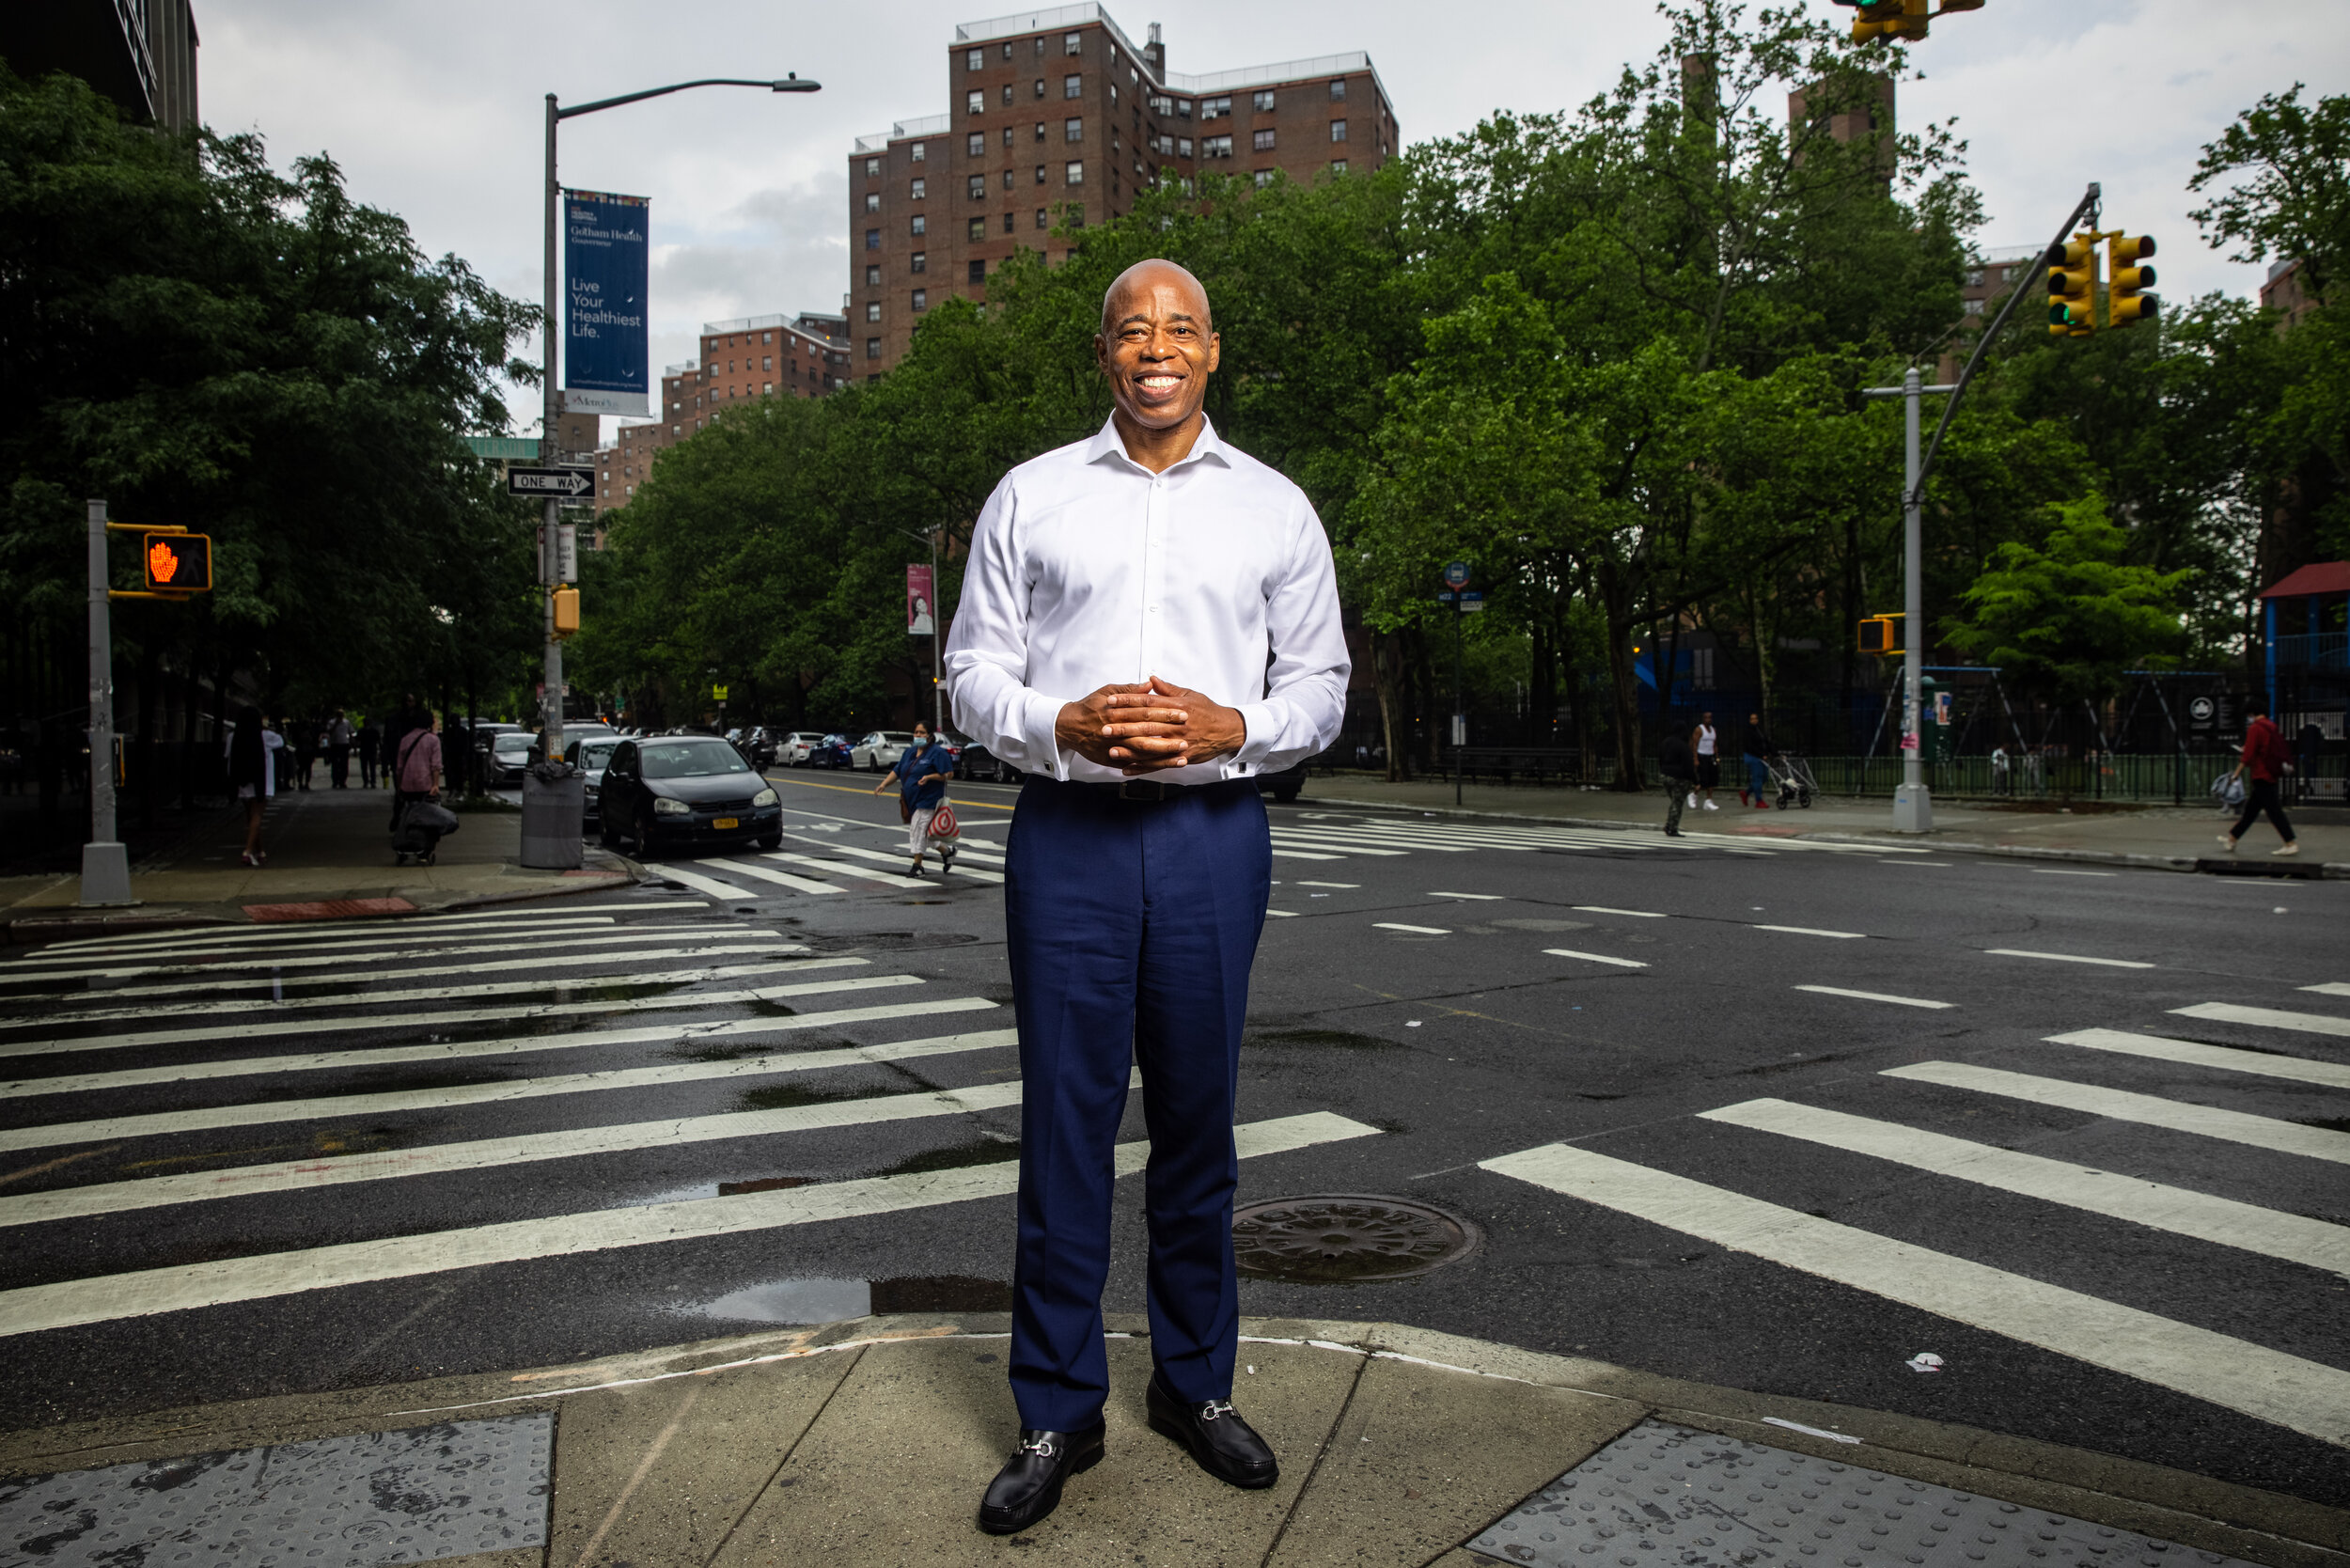  June 4, 2021: New York, NY -   Brooklyn Borough President and NYC mayoral candidate Eric Adams in the Lower East Side of Manhattan.  